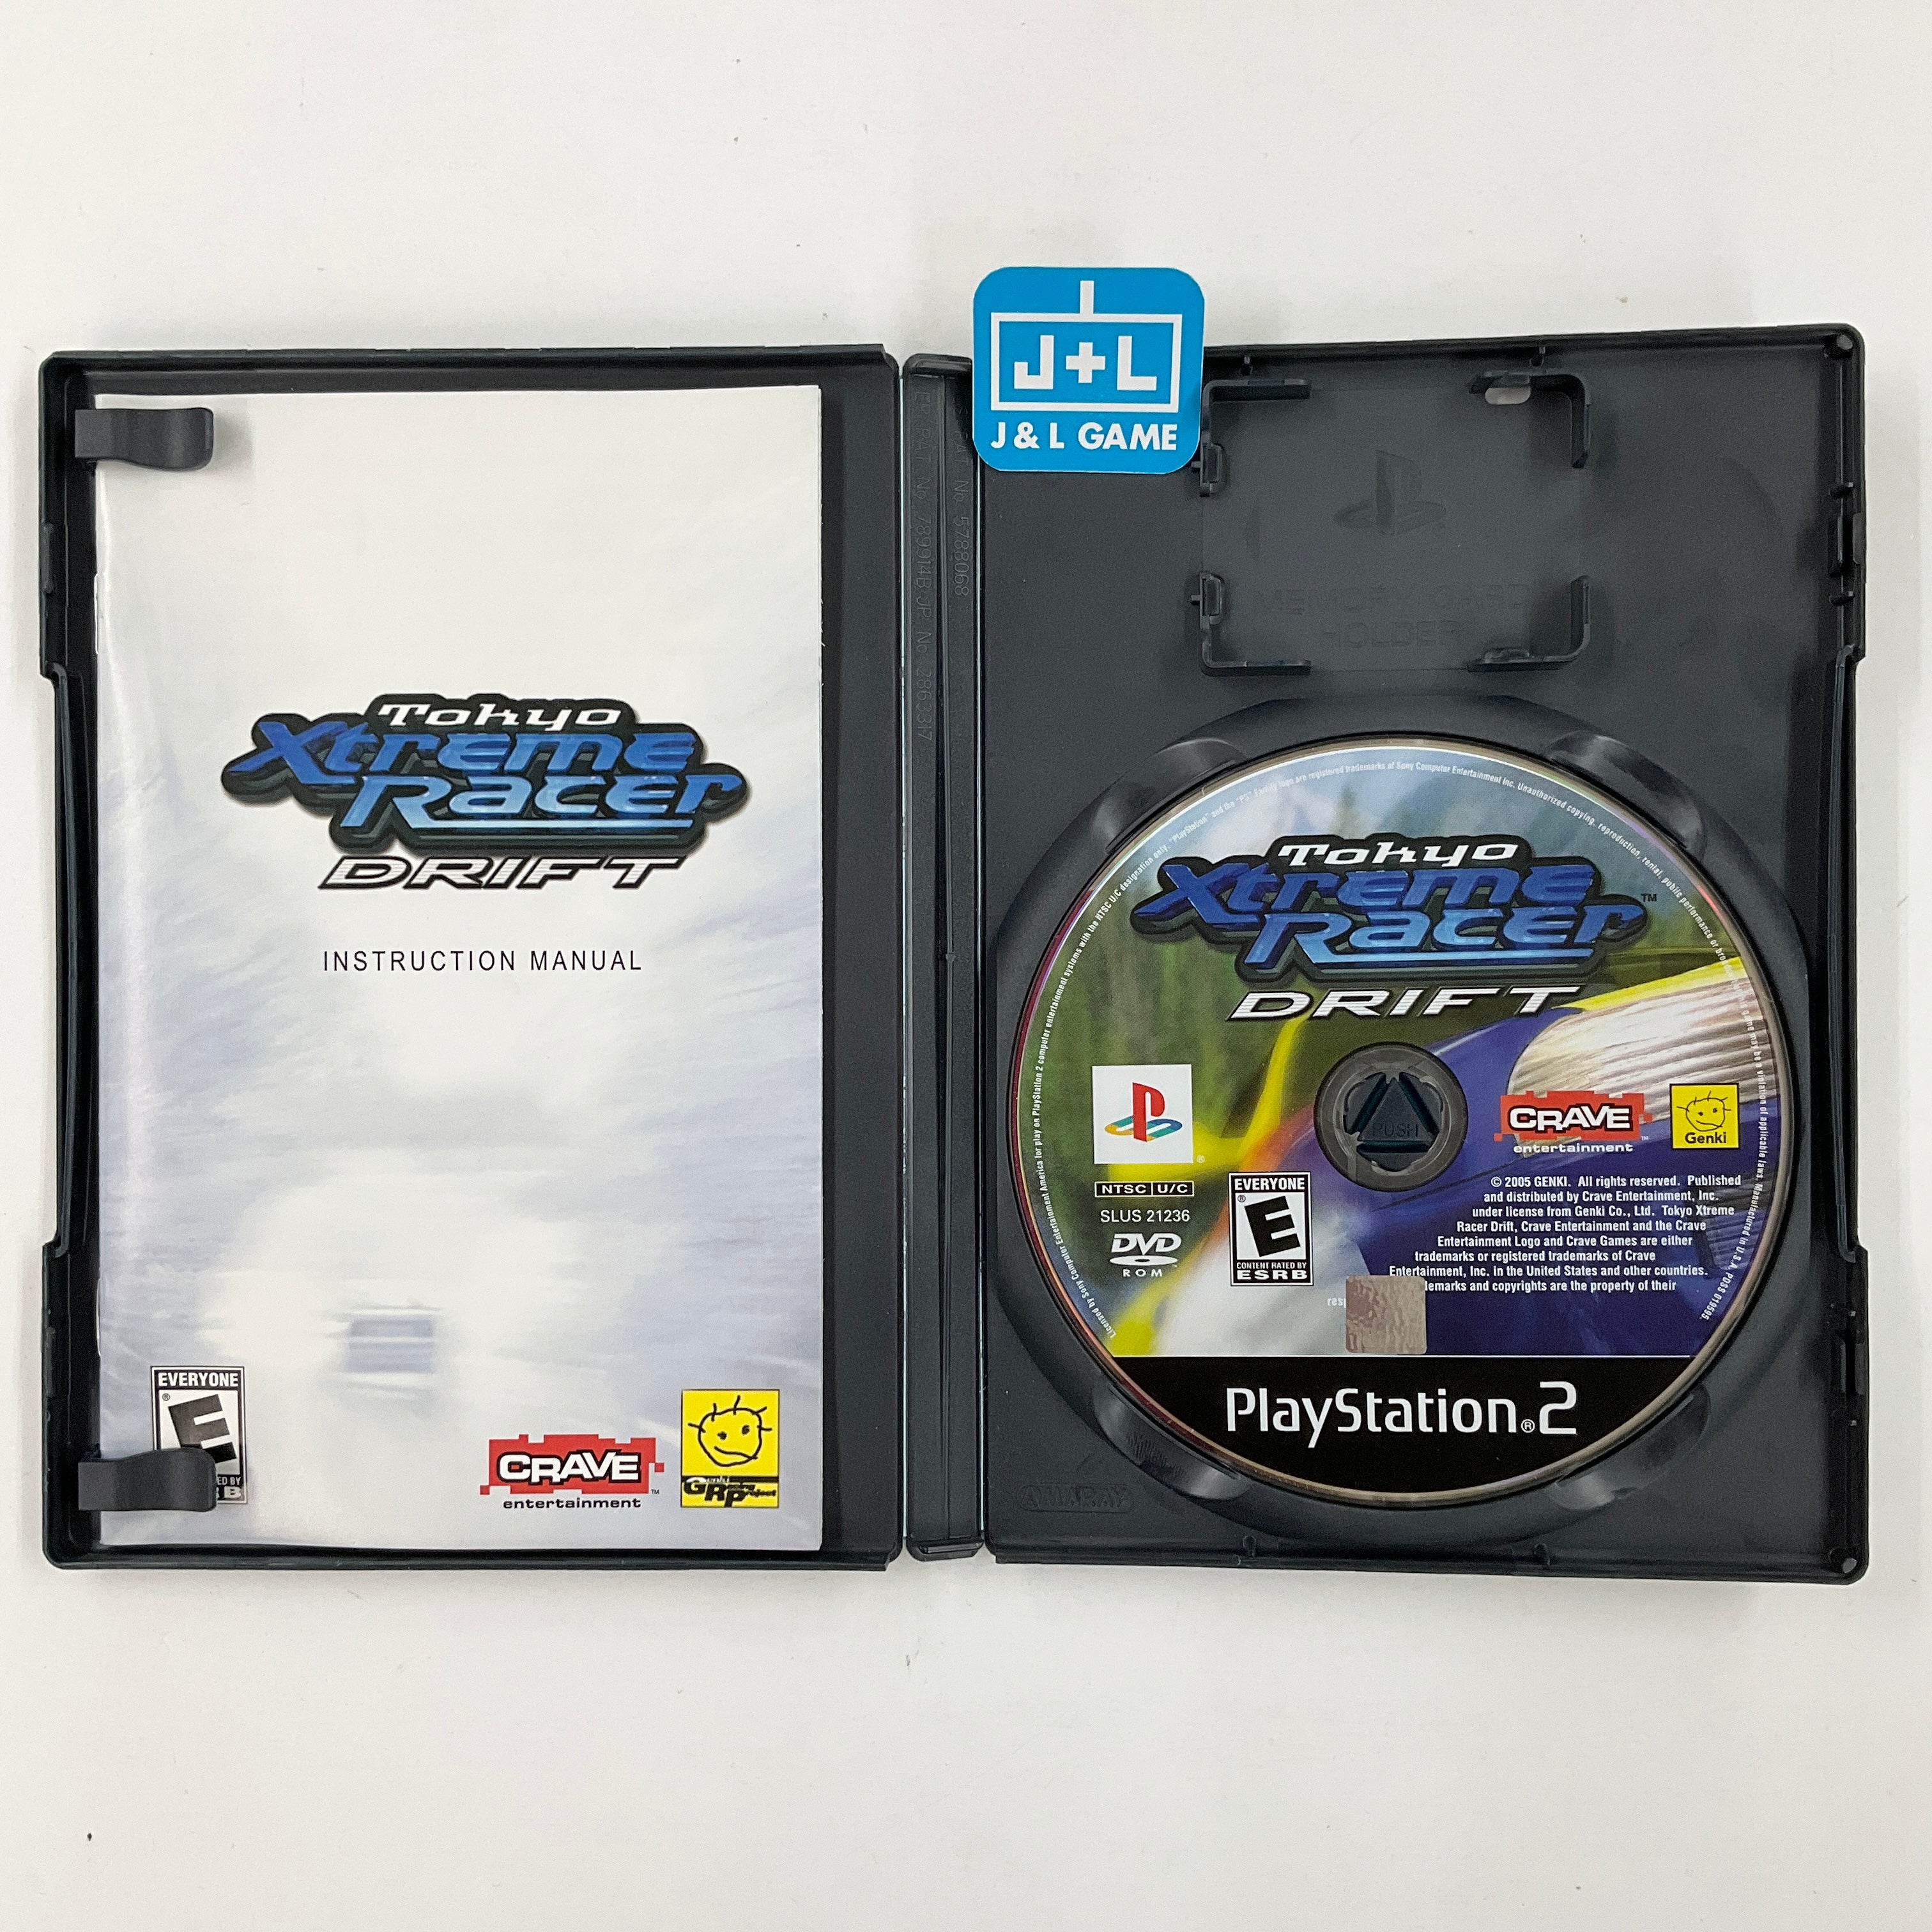 Tokyo Xtreme Racer DRIFT - (PS2) PlayStation 2 [Pre-Owned]